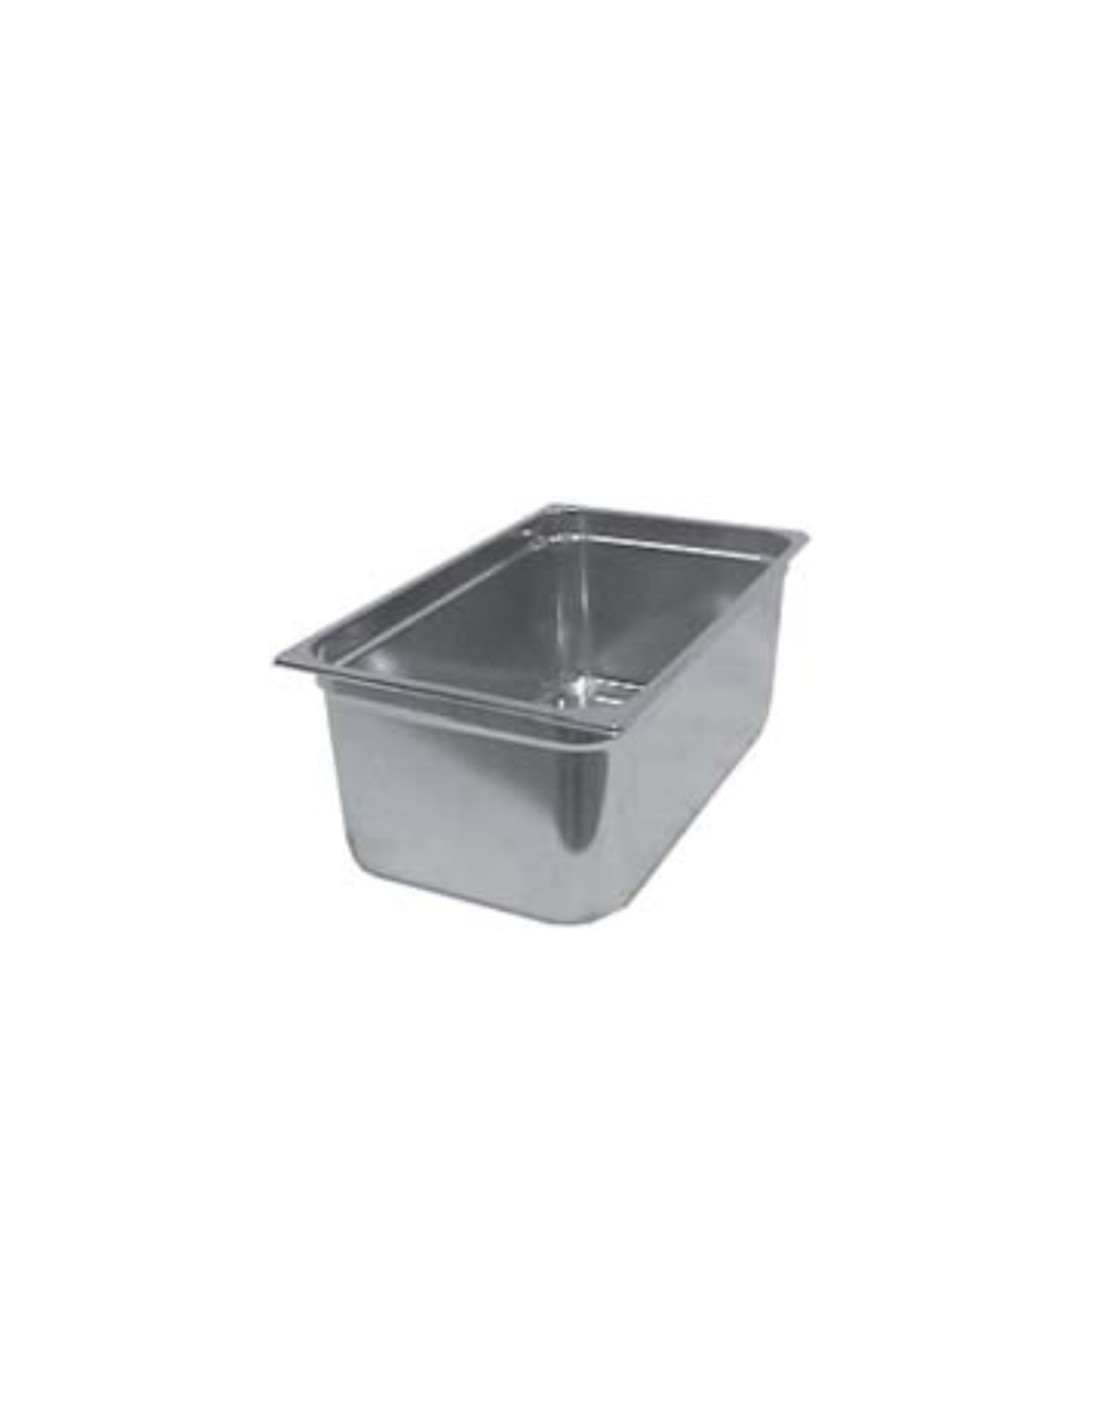 Stainless steel containers for bain-marie - Tank capacity lt 2.3 GN 1/6 - Dimensions 17.6 x 16.2 x 15 cm